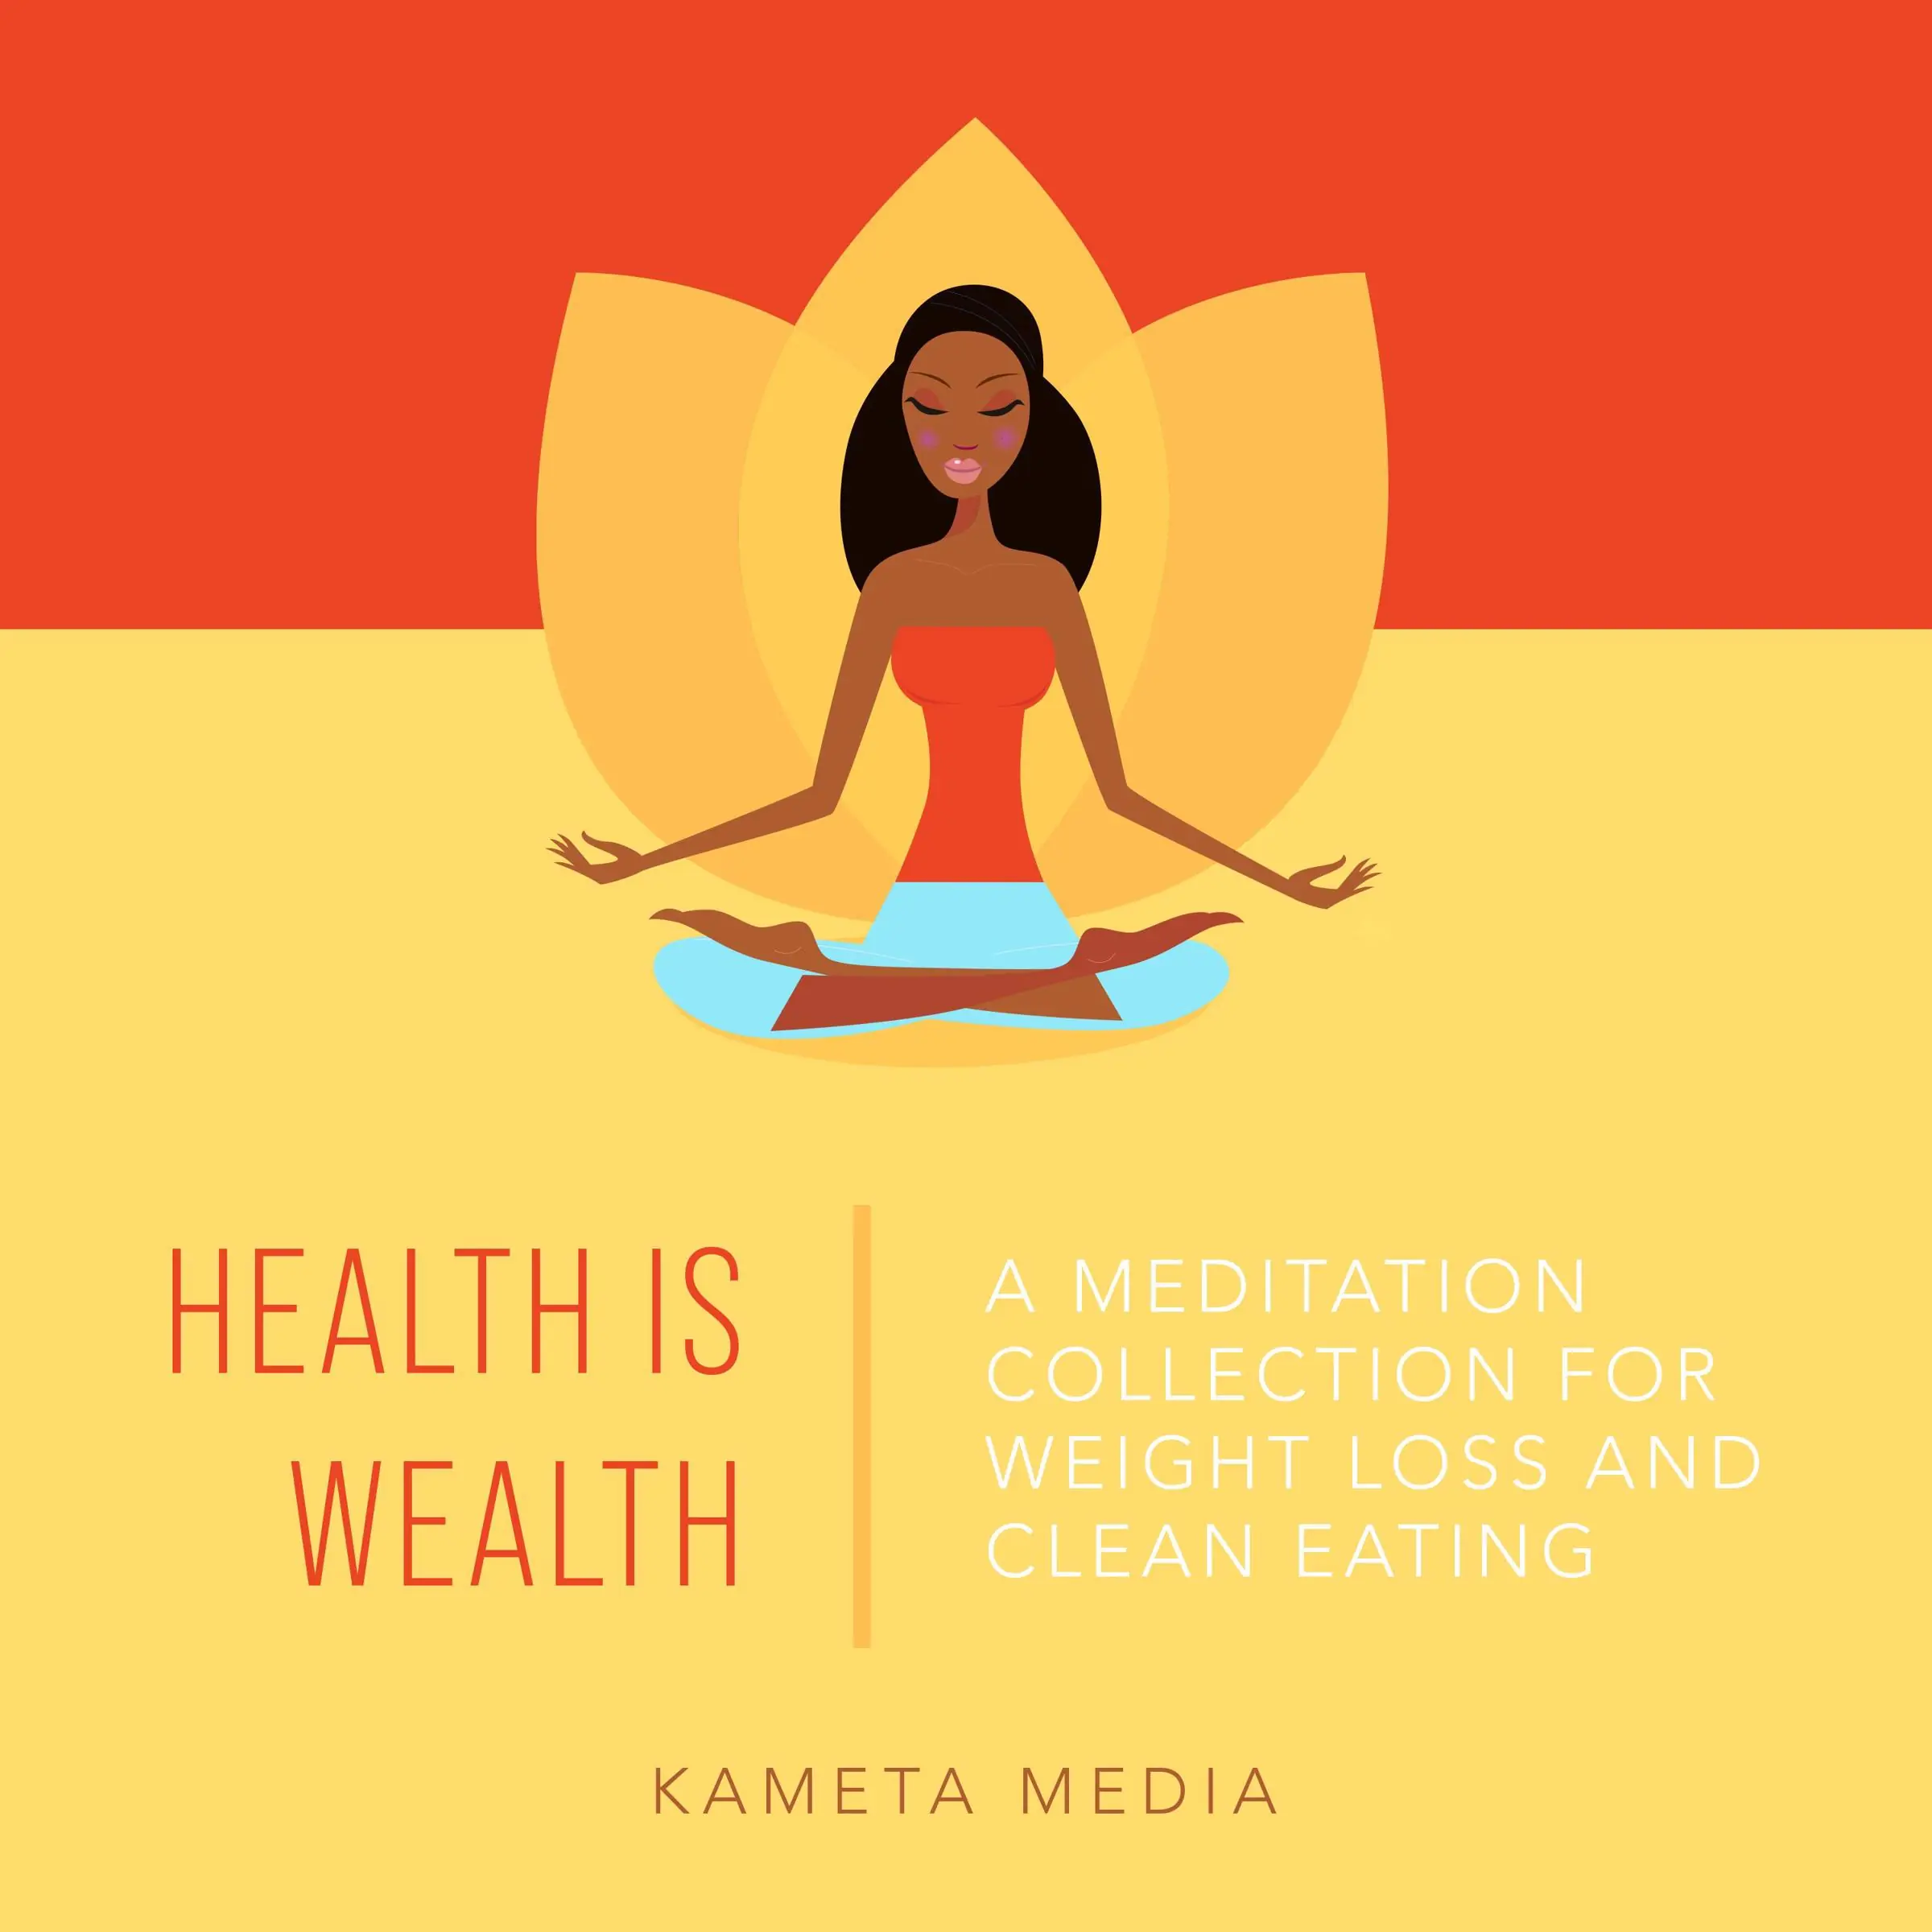 Health Is Wealth: A Meditation Collection for Weight Loss and Clean Eating Audiobook by Kameta Media